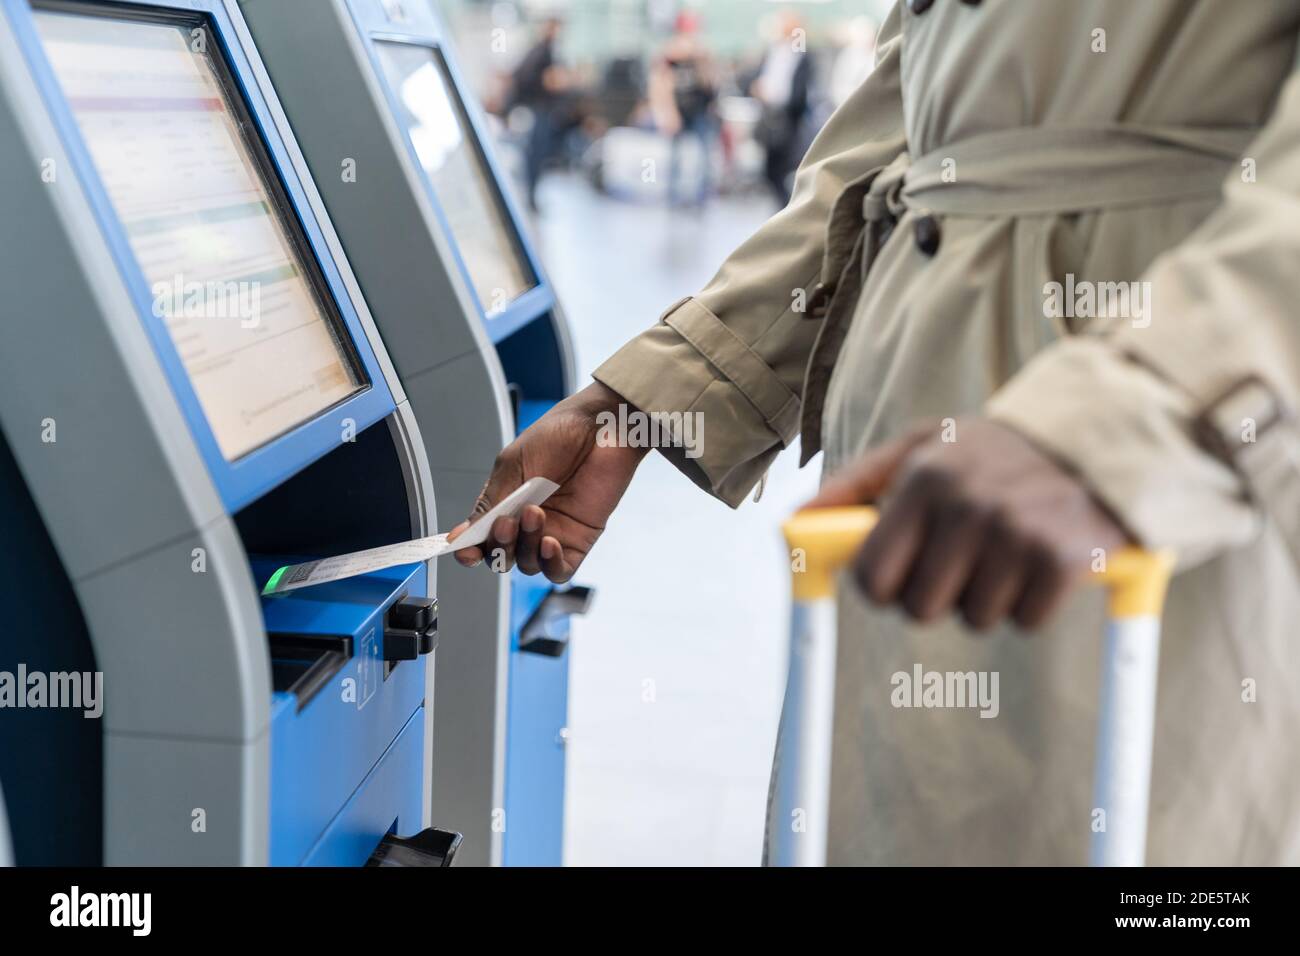 Black traveler man using self check-in machine kiosk service at airport, scans code on boarding ticket. Close up. Stock Photo